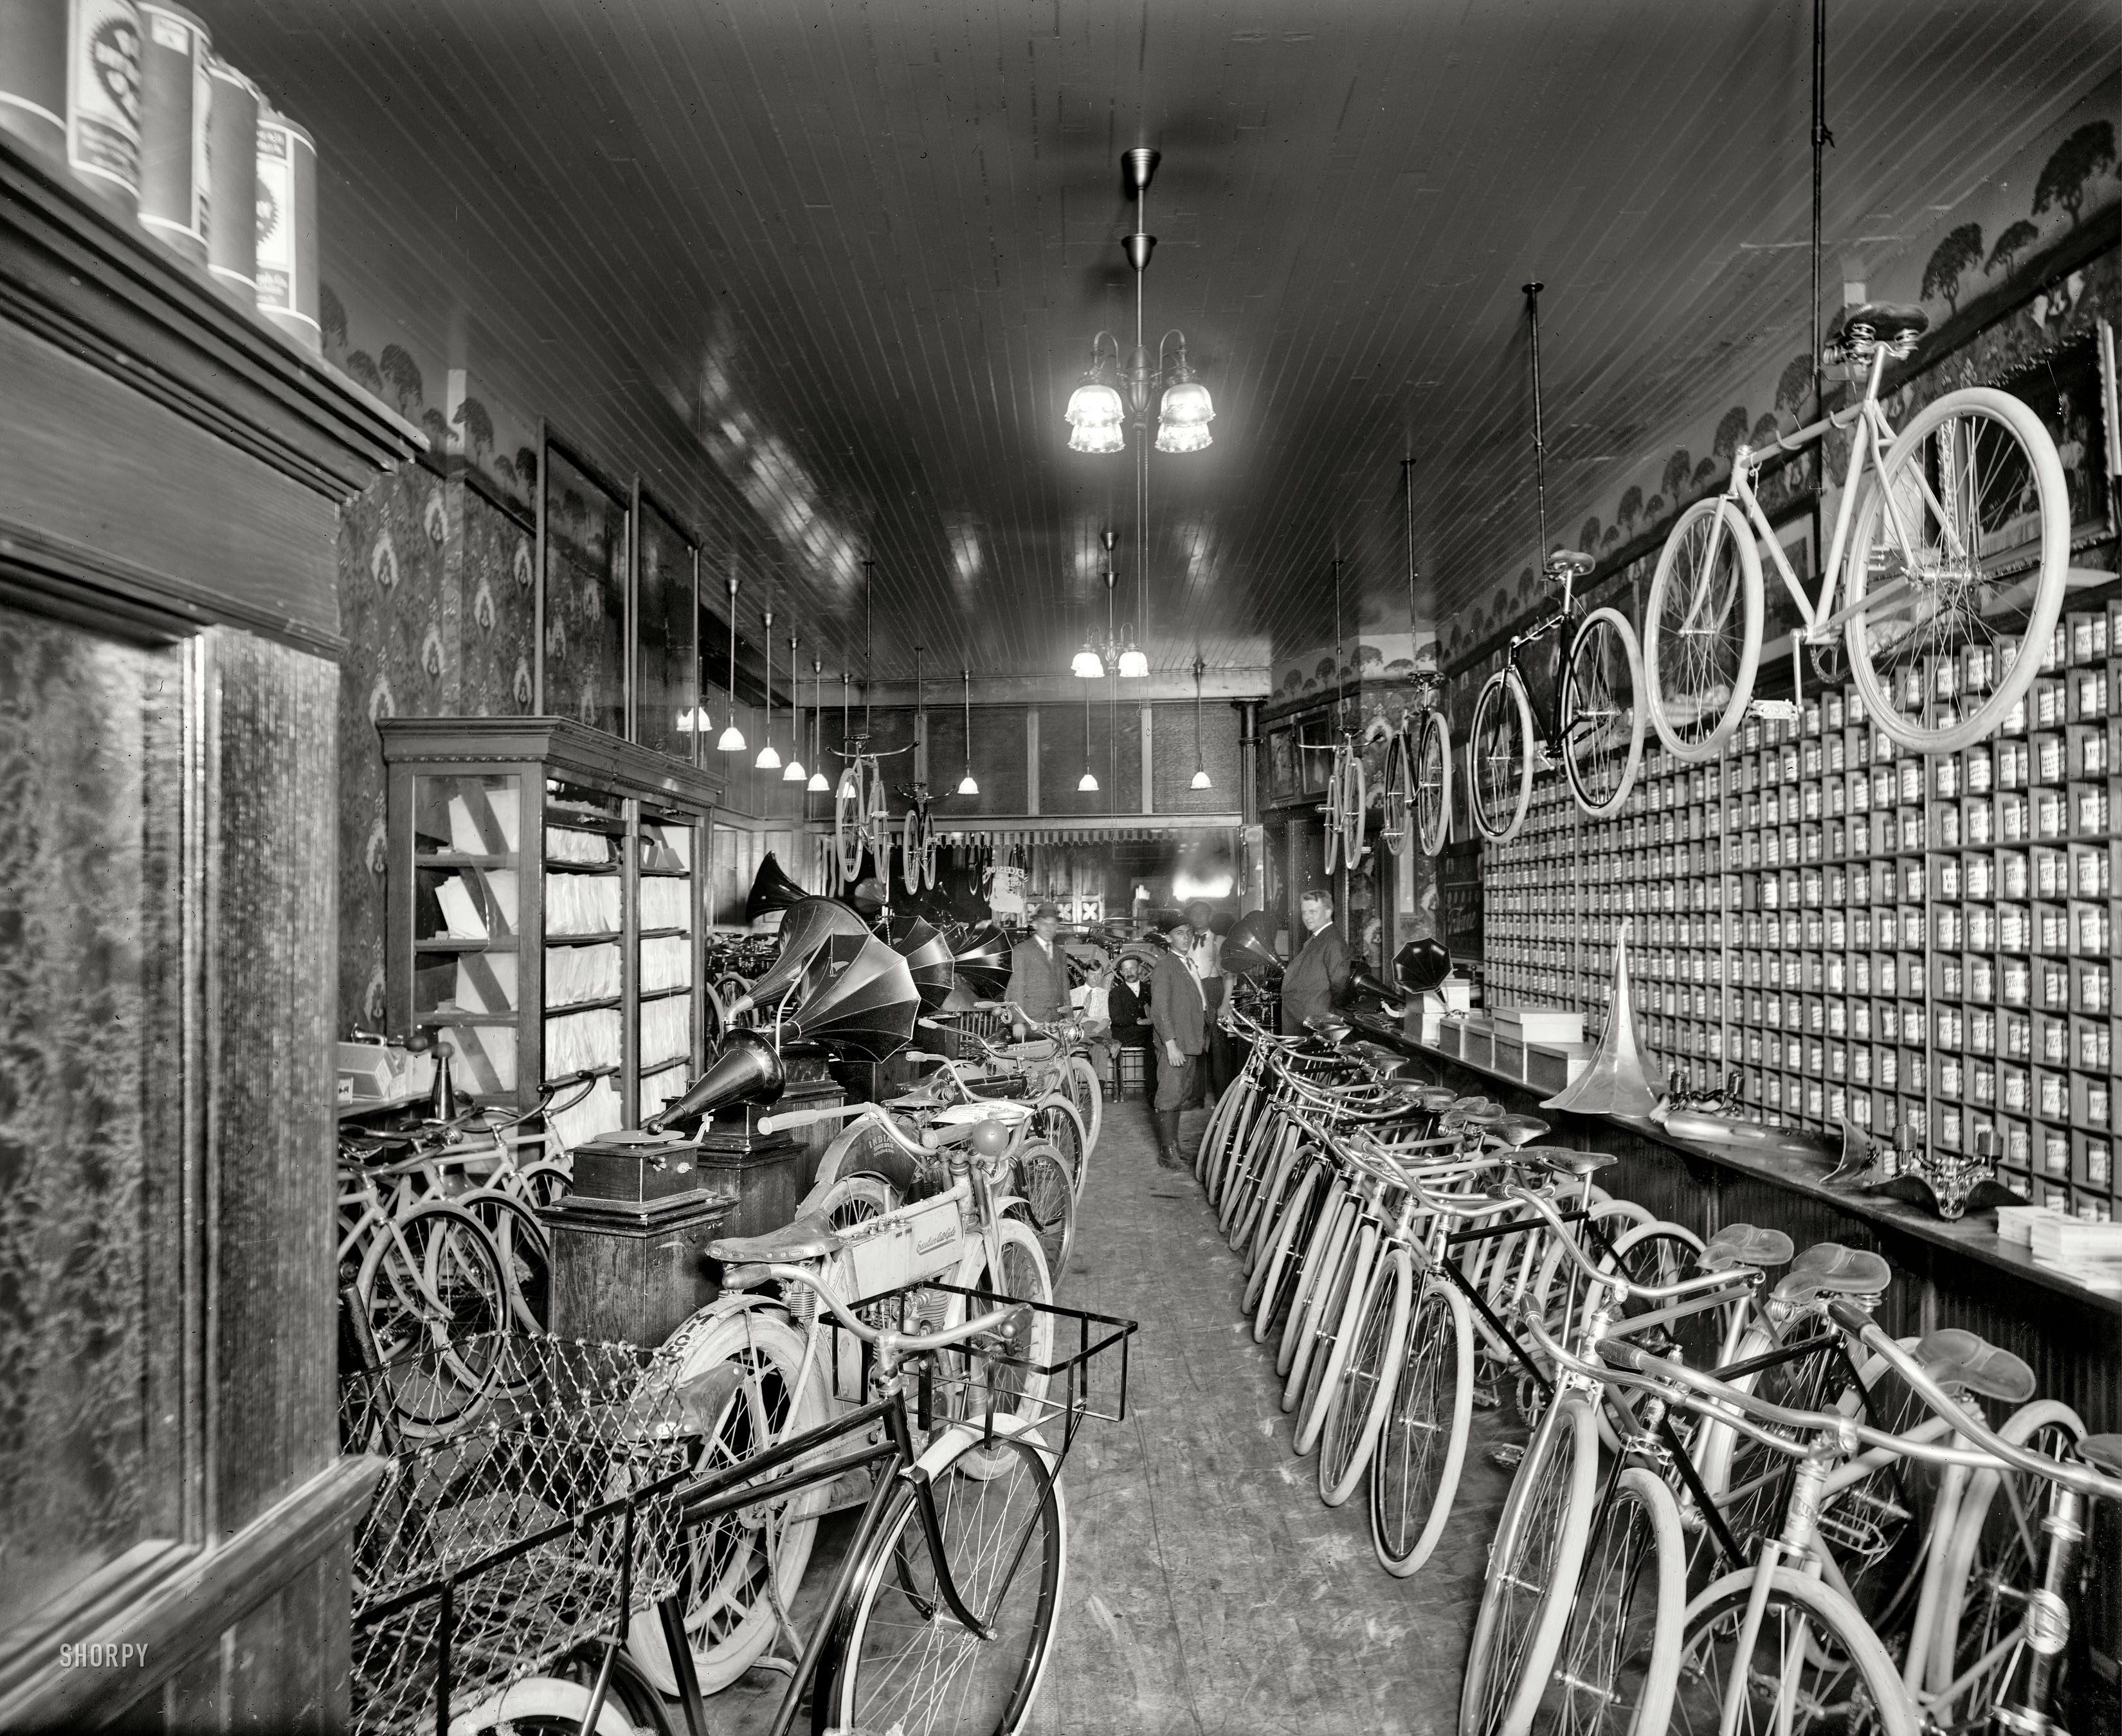 Detroit, Michigan, circa 1912. "Metzger bicycle shop. Detroit City Gas Co." This photo of a cycle (and phonograph) shop was taken to show off the gaslight fixtures. 8x10 glass negative, Detroit Publishing Company. View full size.